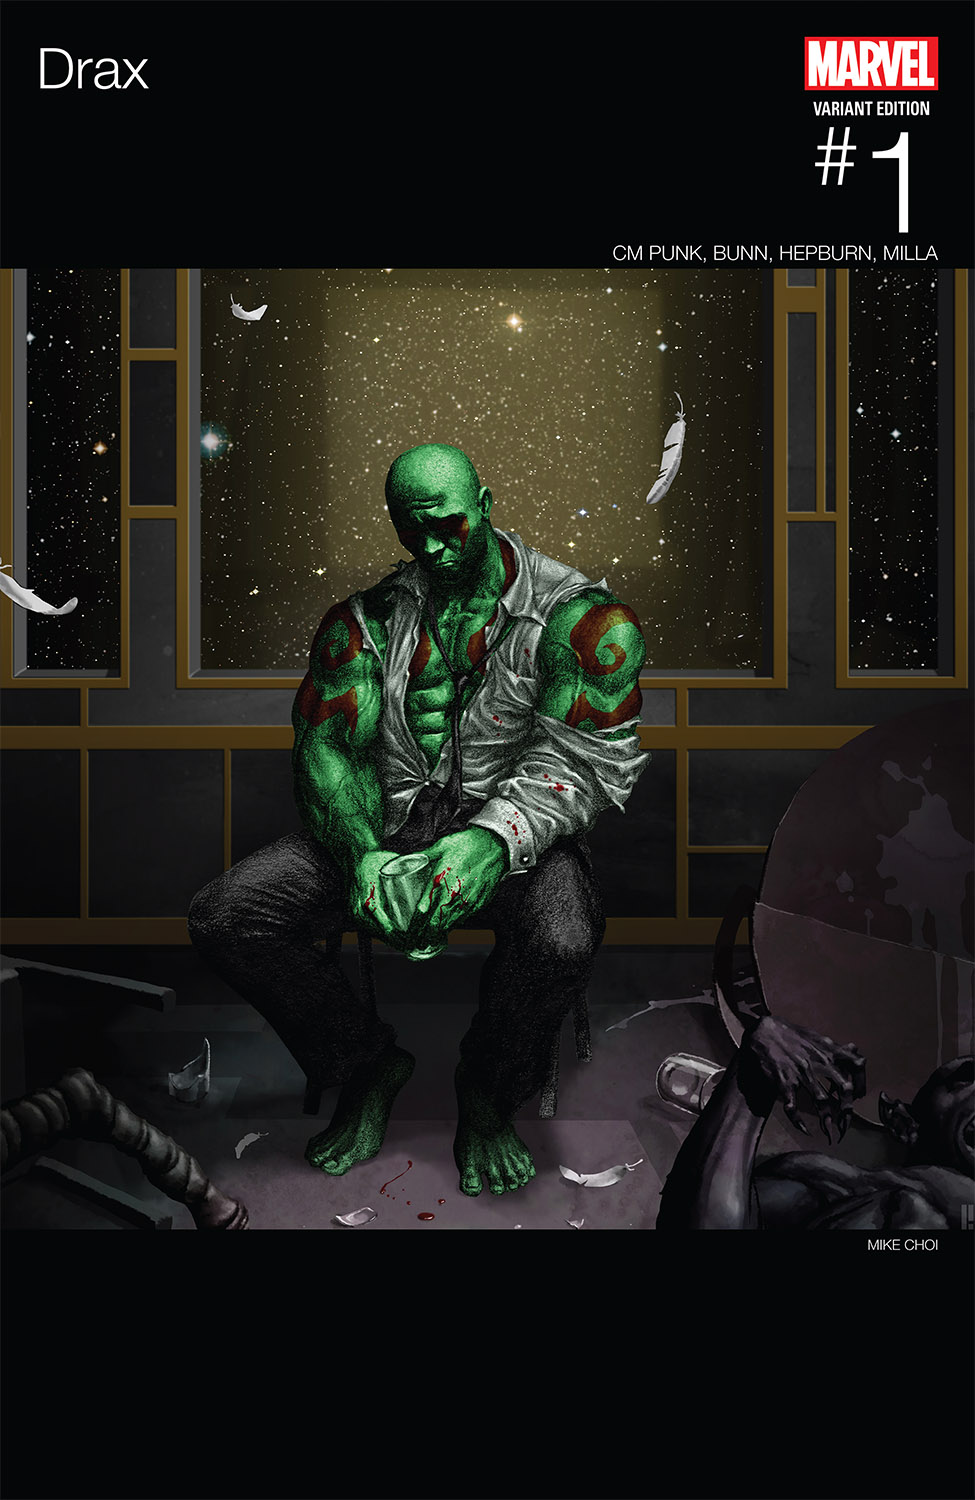 DRAX   #1 HIP HOP  Variant Cover Near Mint Free Shipping   BUY IT NOW